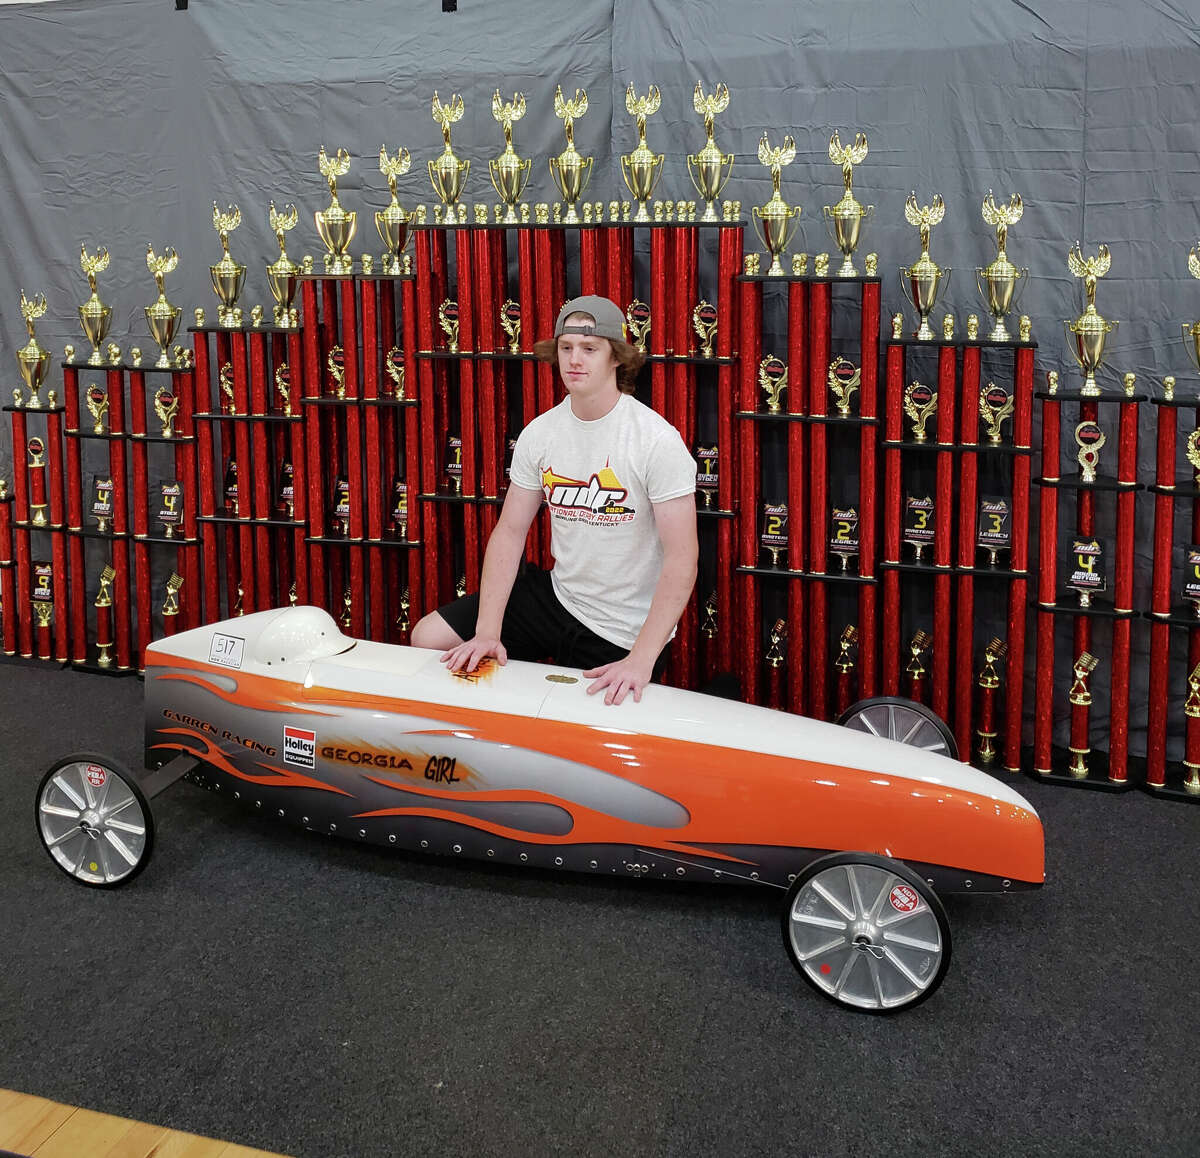 Midland's Jamison Geisler poses with his soap box derby car at the National Derby Rallies in Bowling Green, Ky., recently.